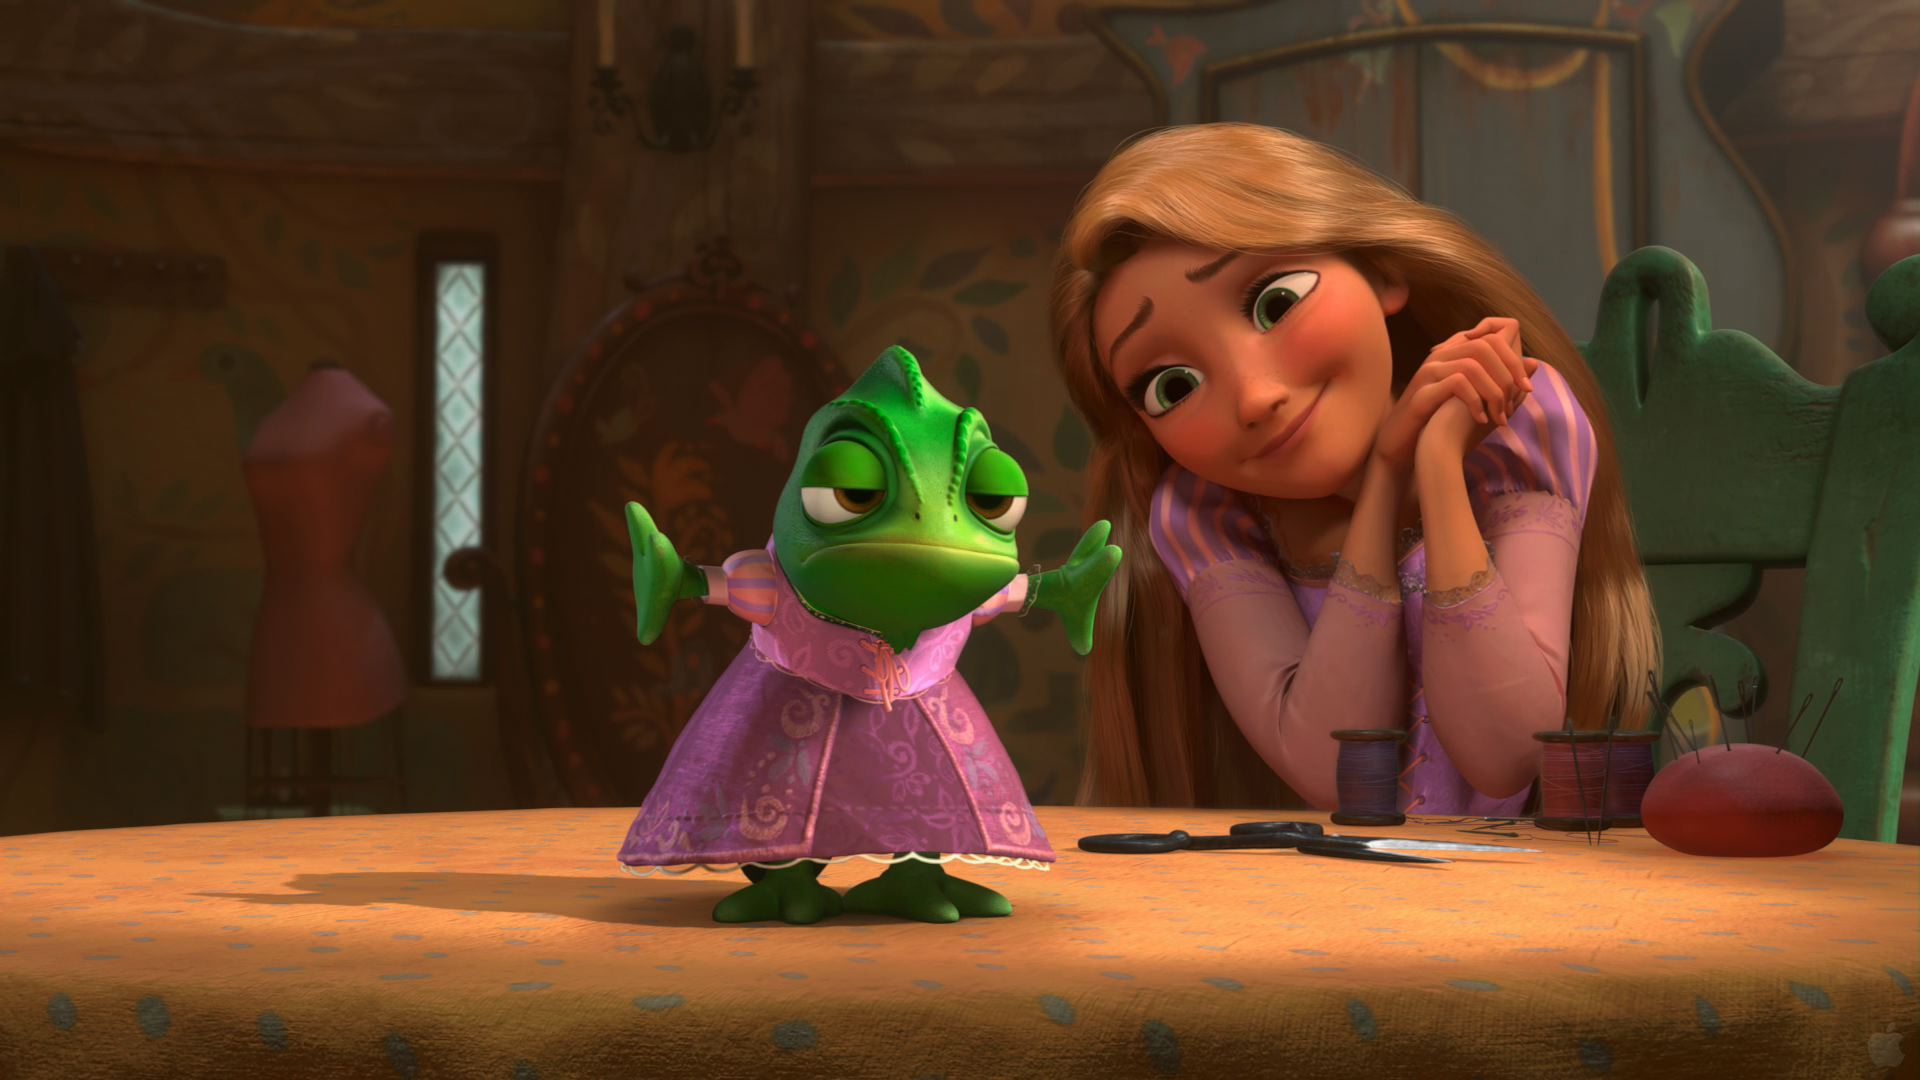 1920x1080 Pascal and Rapunzel from Tangled Desktop Wallpaper